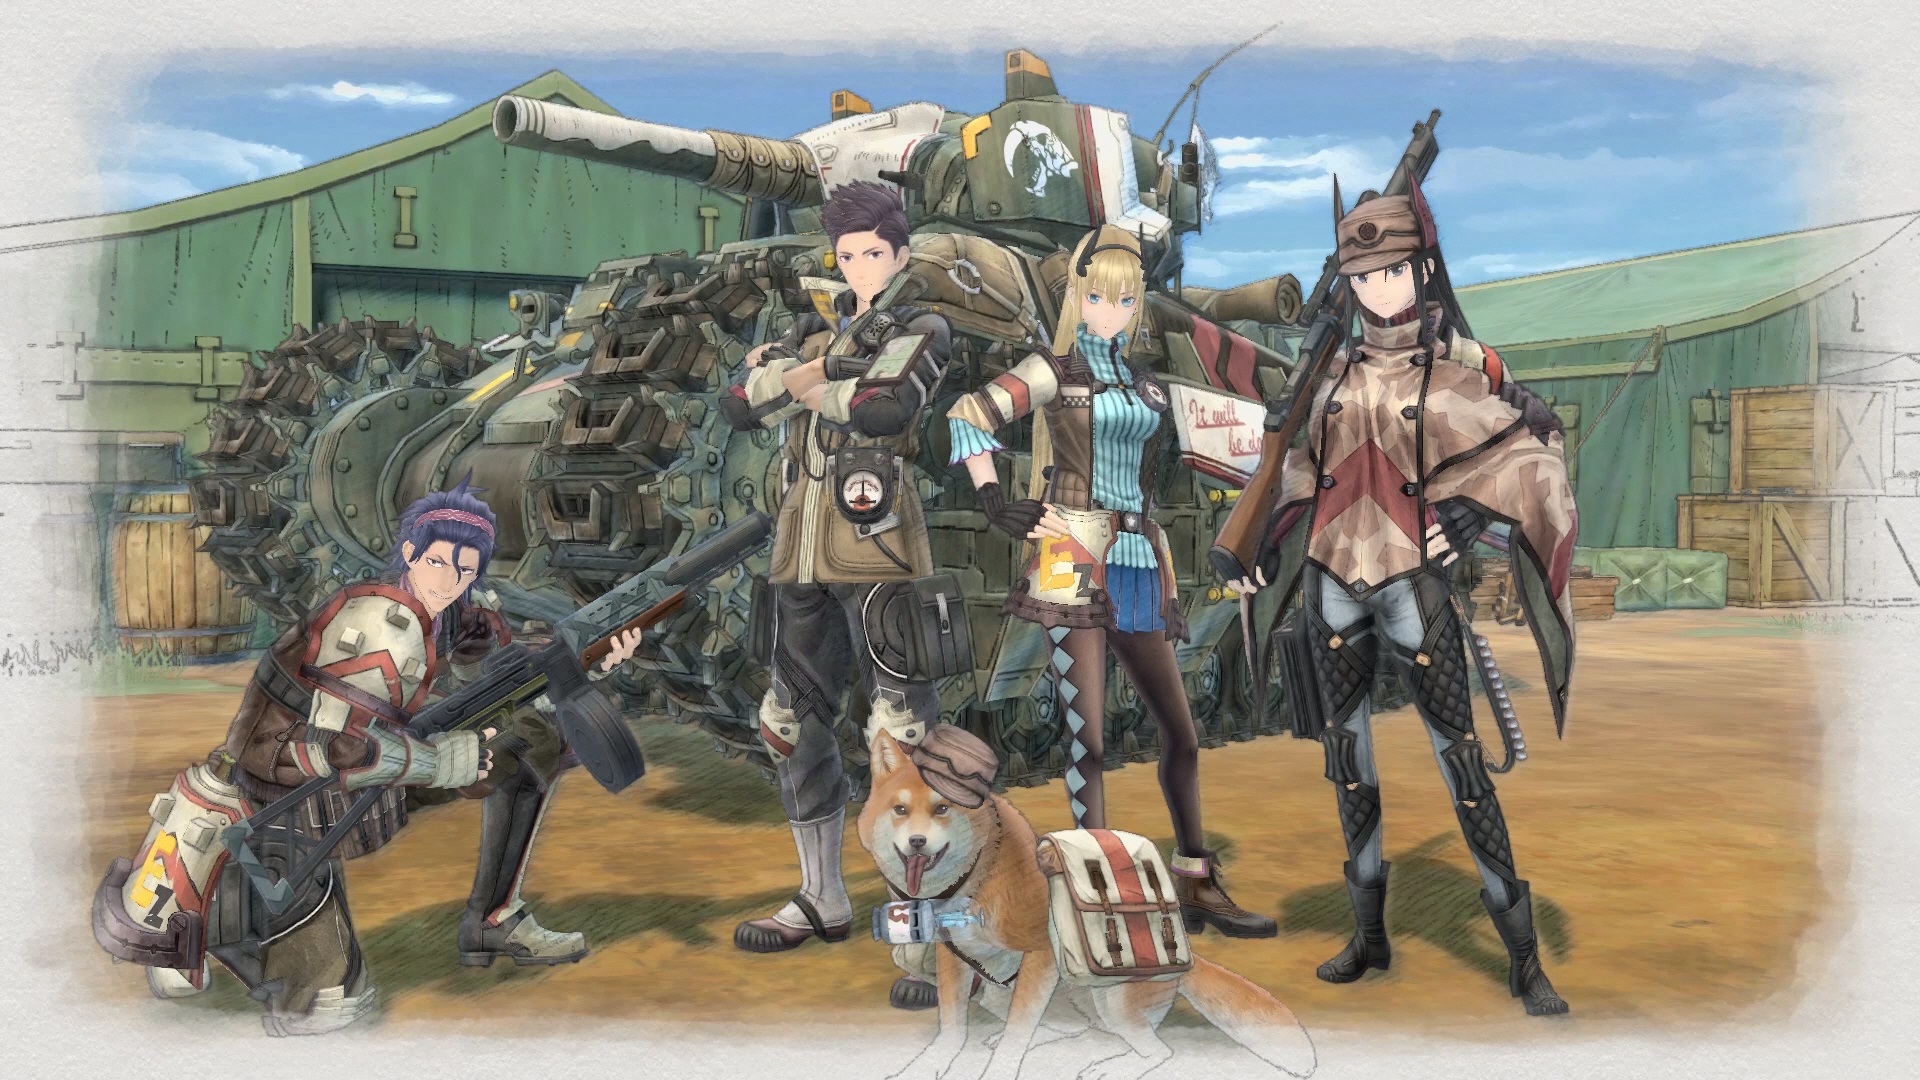 Valkyria Chronicles 4 Announced for PlayStation 4, Xbox One, and Switch – Set for Worldwide 2018 Release